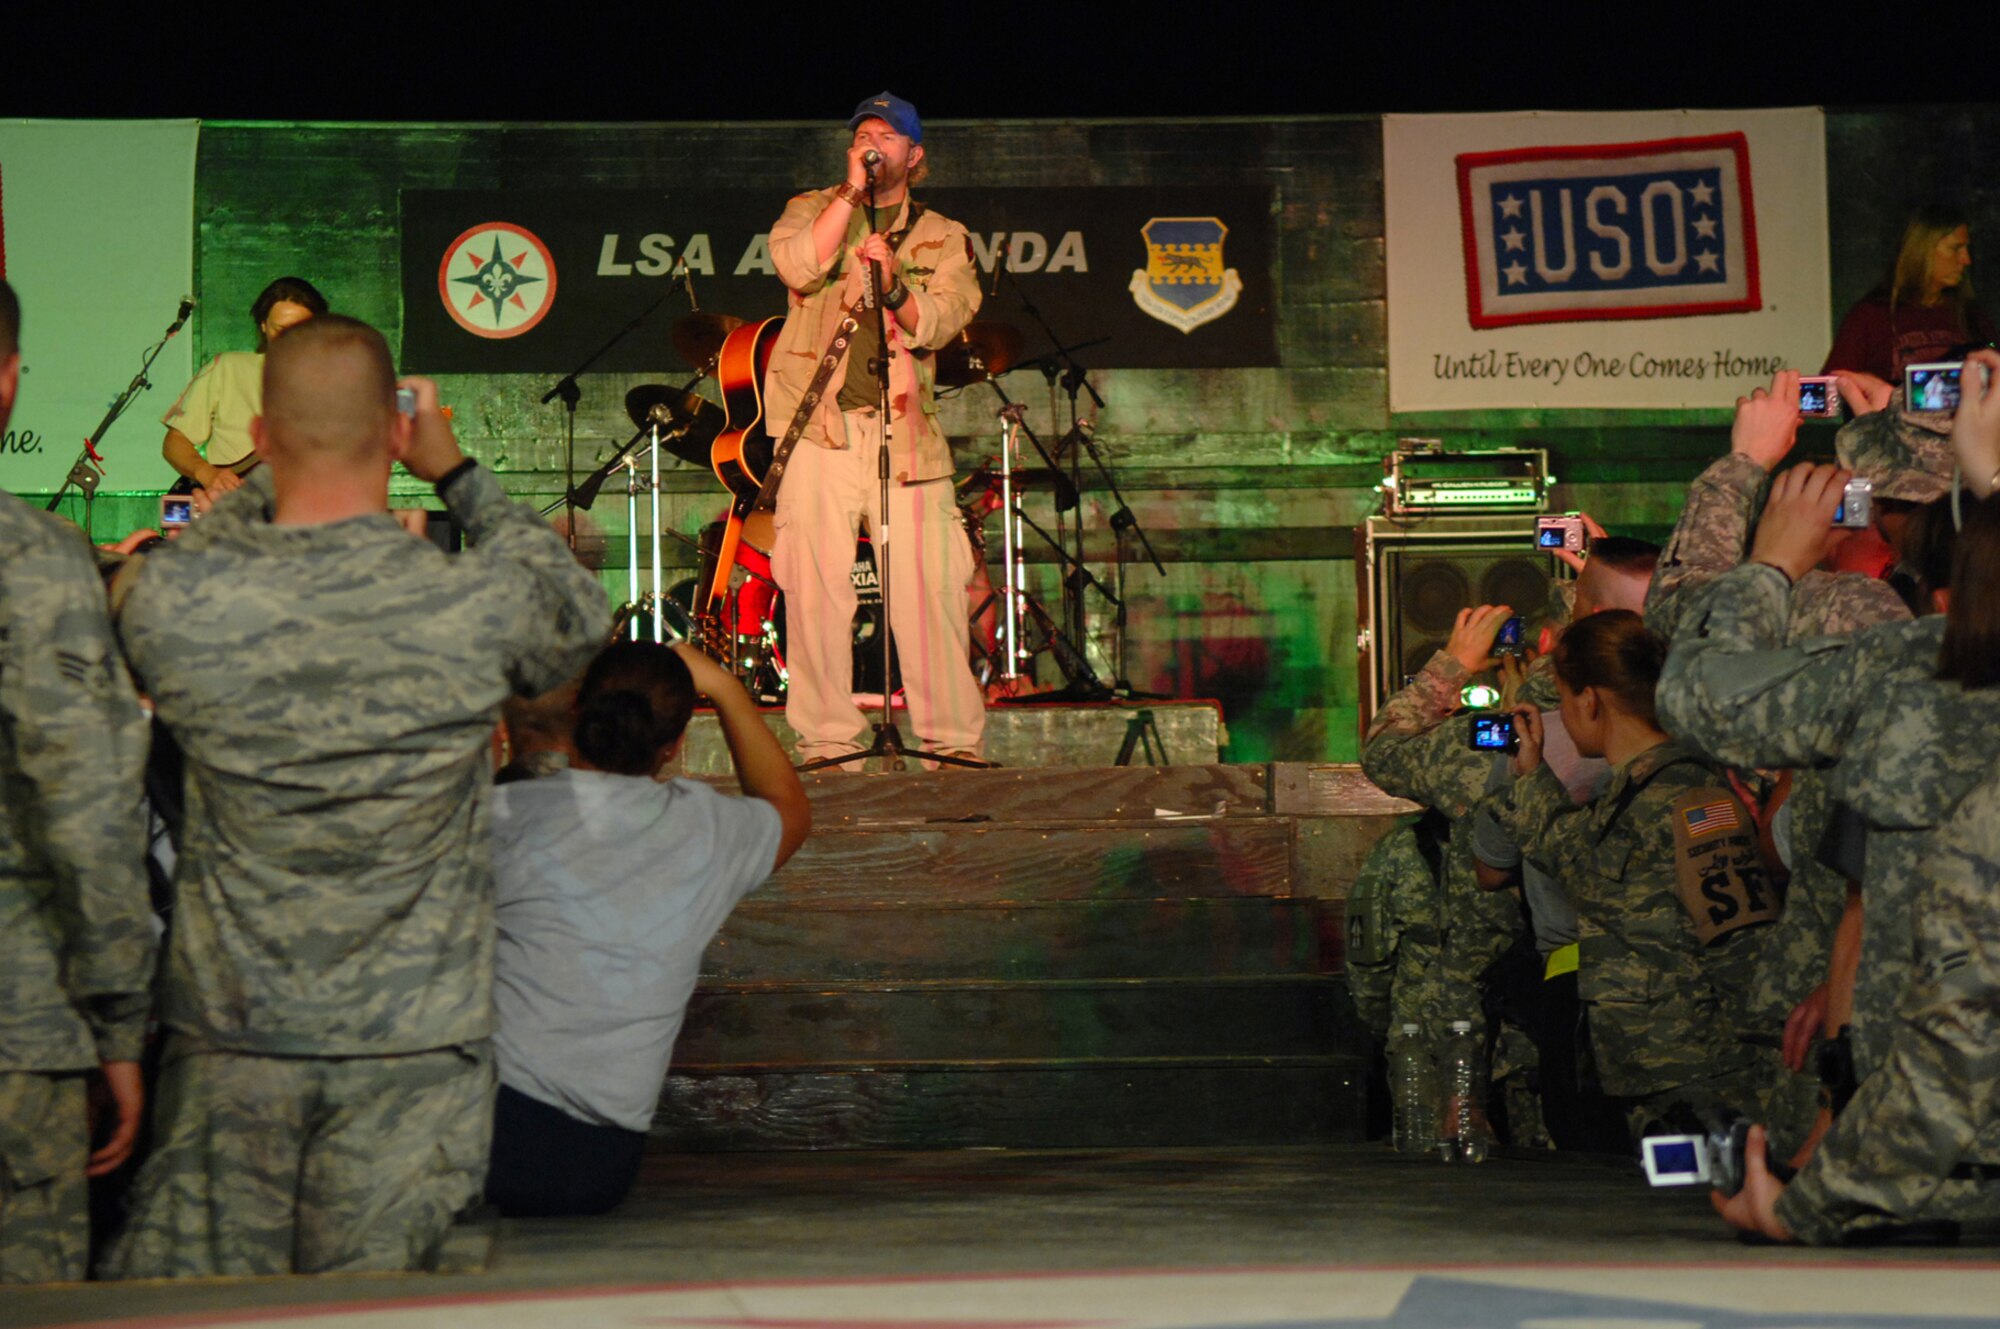 BALAD AIR BASE, Iraq -- Country music superstar Toby Keith sings to a crowd of more than 5,000 servicemembers here, April 28. Mr. Keith told those in attendance that he was proud of their service and thankful for their efforts in fighting terrorists and keeping America free. He referred to military members as 'warriors' and was present for the re-enlistments of five Soldiers stationed at Logistics Support Agency Anaconda, which is co-located with Balad. Mr. Keith is wrapping up his sixth USO tour in Iraq; his show at Balad marked his 117th show in the Area of Responsibility. (U.S. Air Force photo/ Senior Airman Julianne Showalter)